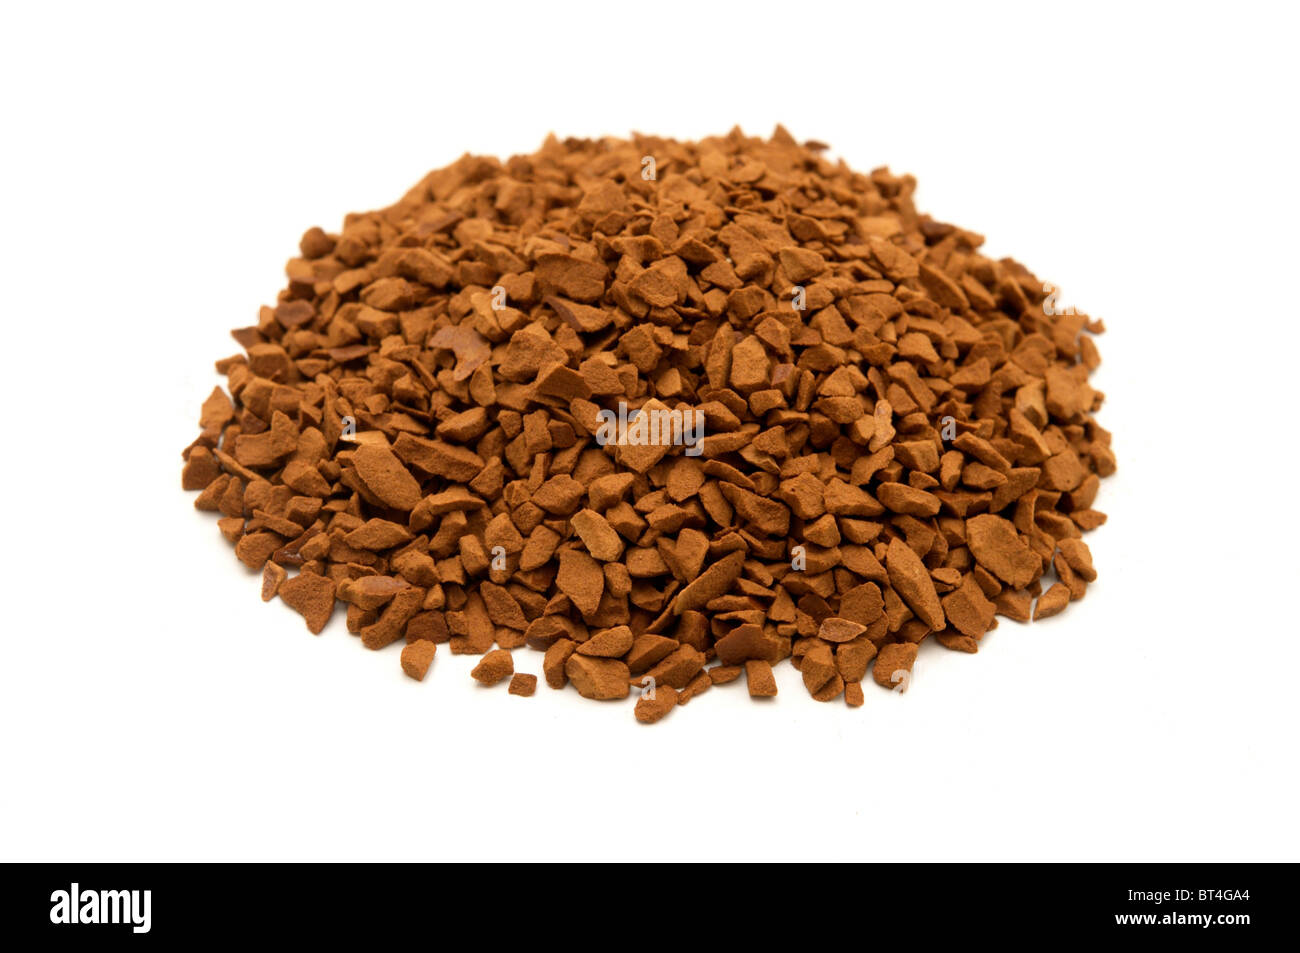 Instant coffee on a white background Stock Photo